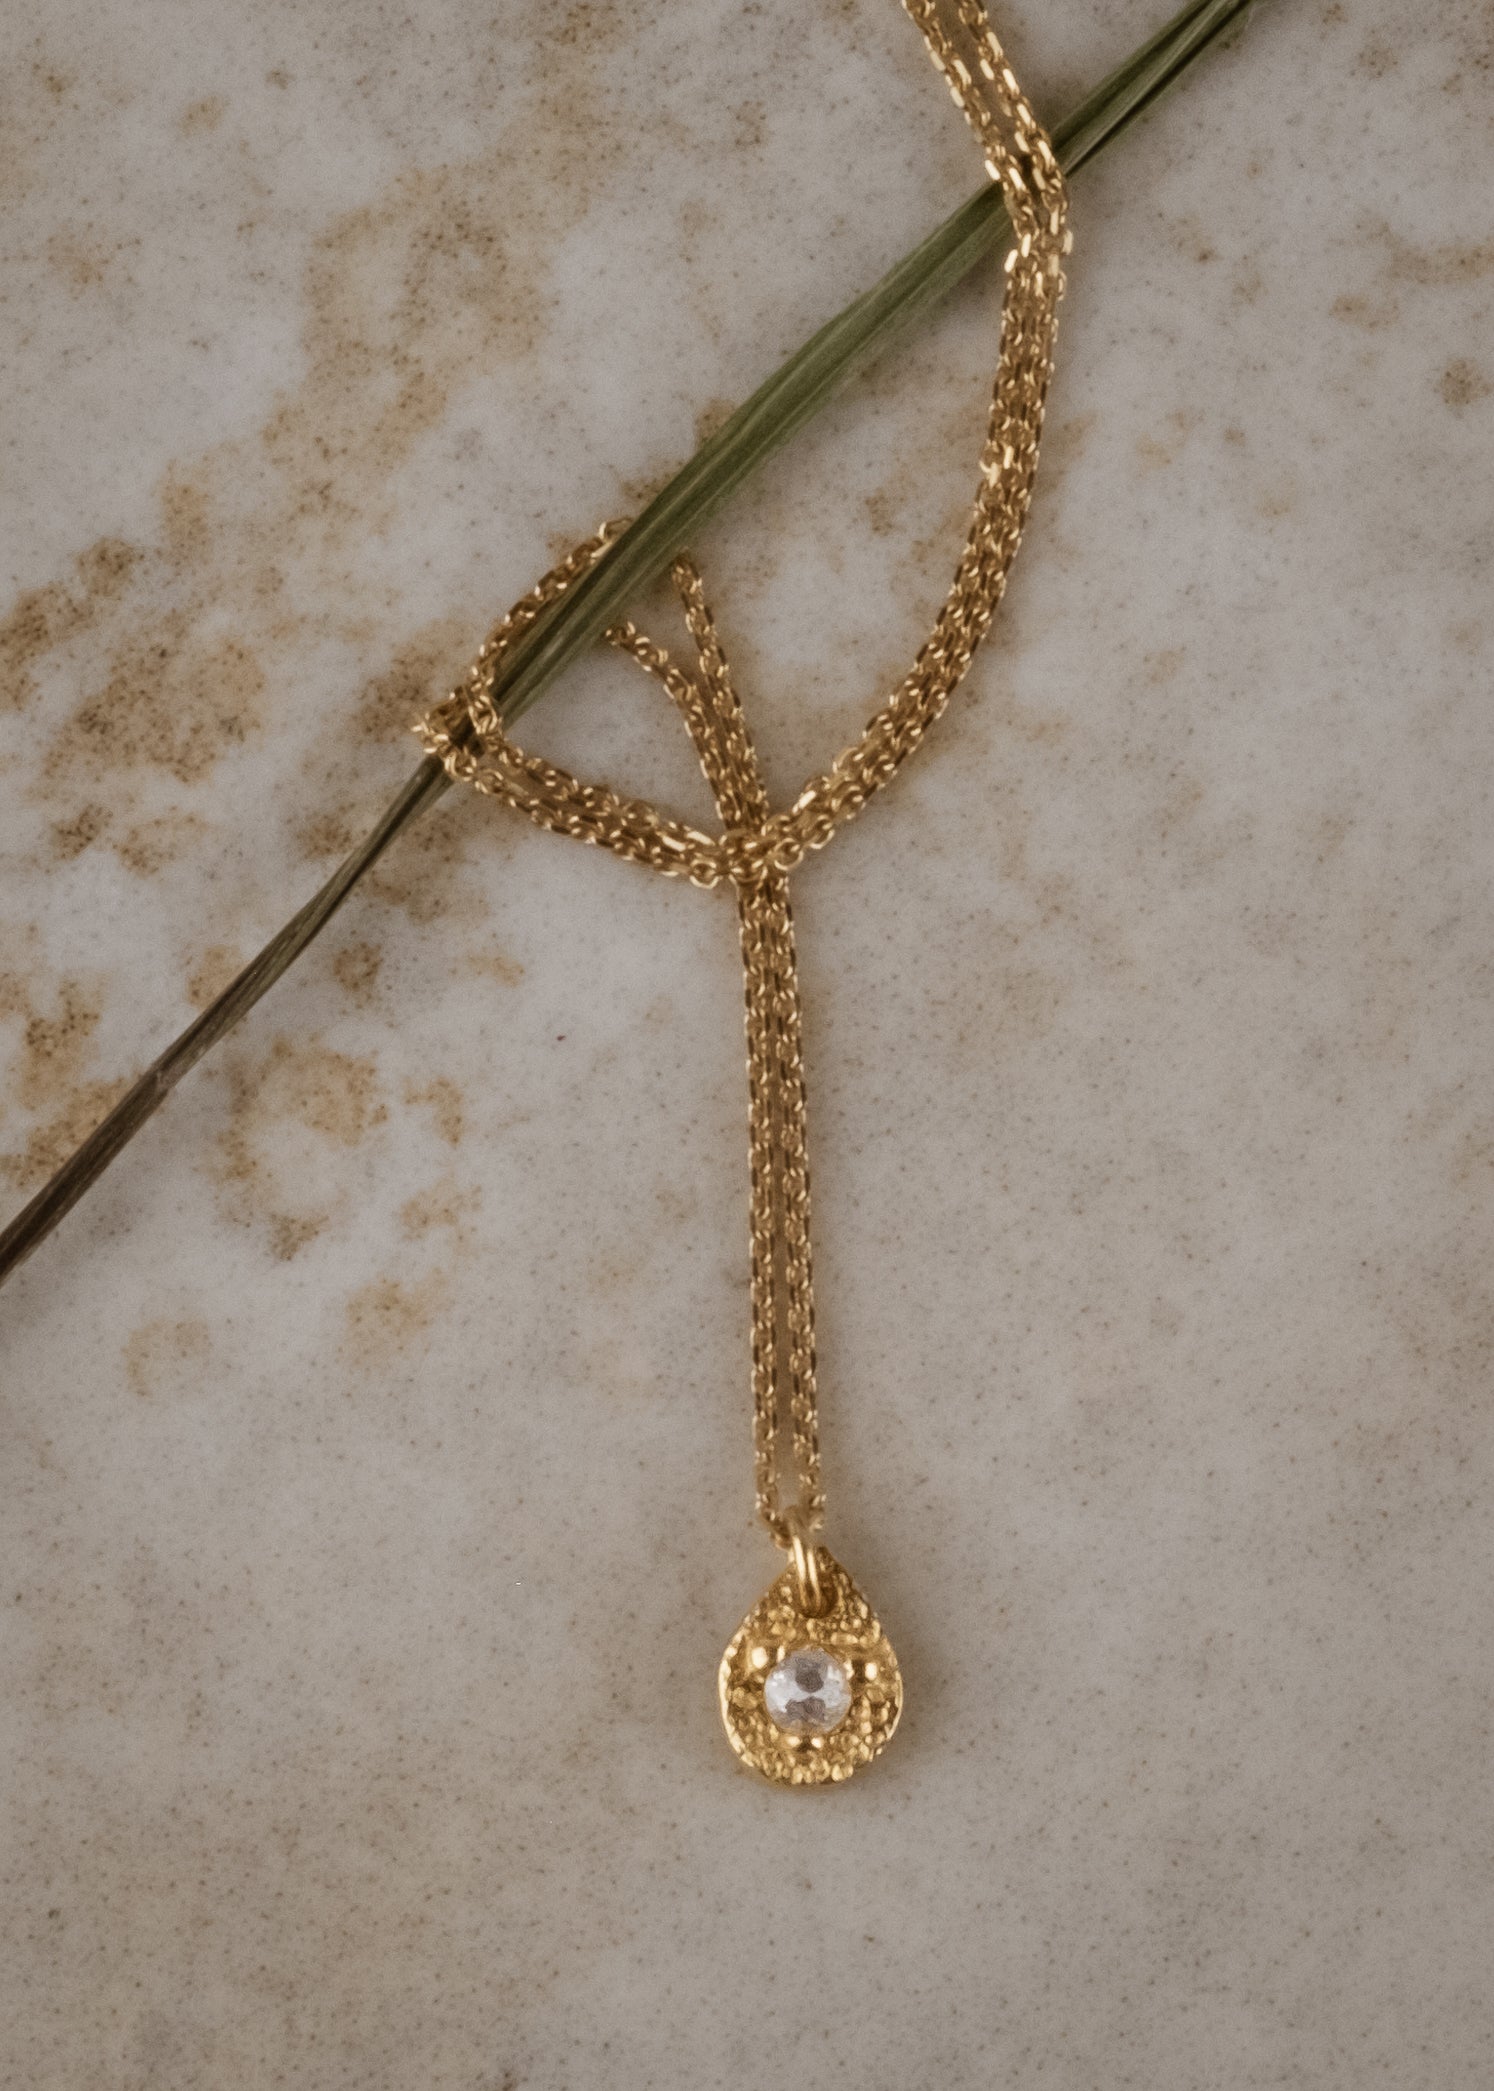 A romantic journey that transcends time. The Drop necklace merges a circle of understated hand-carved gold beads with ornate rose cut diamonds for a dangling romantic style that feels as at home today as it does in an antique jewelry box. 